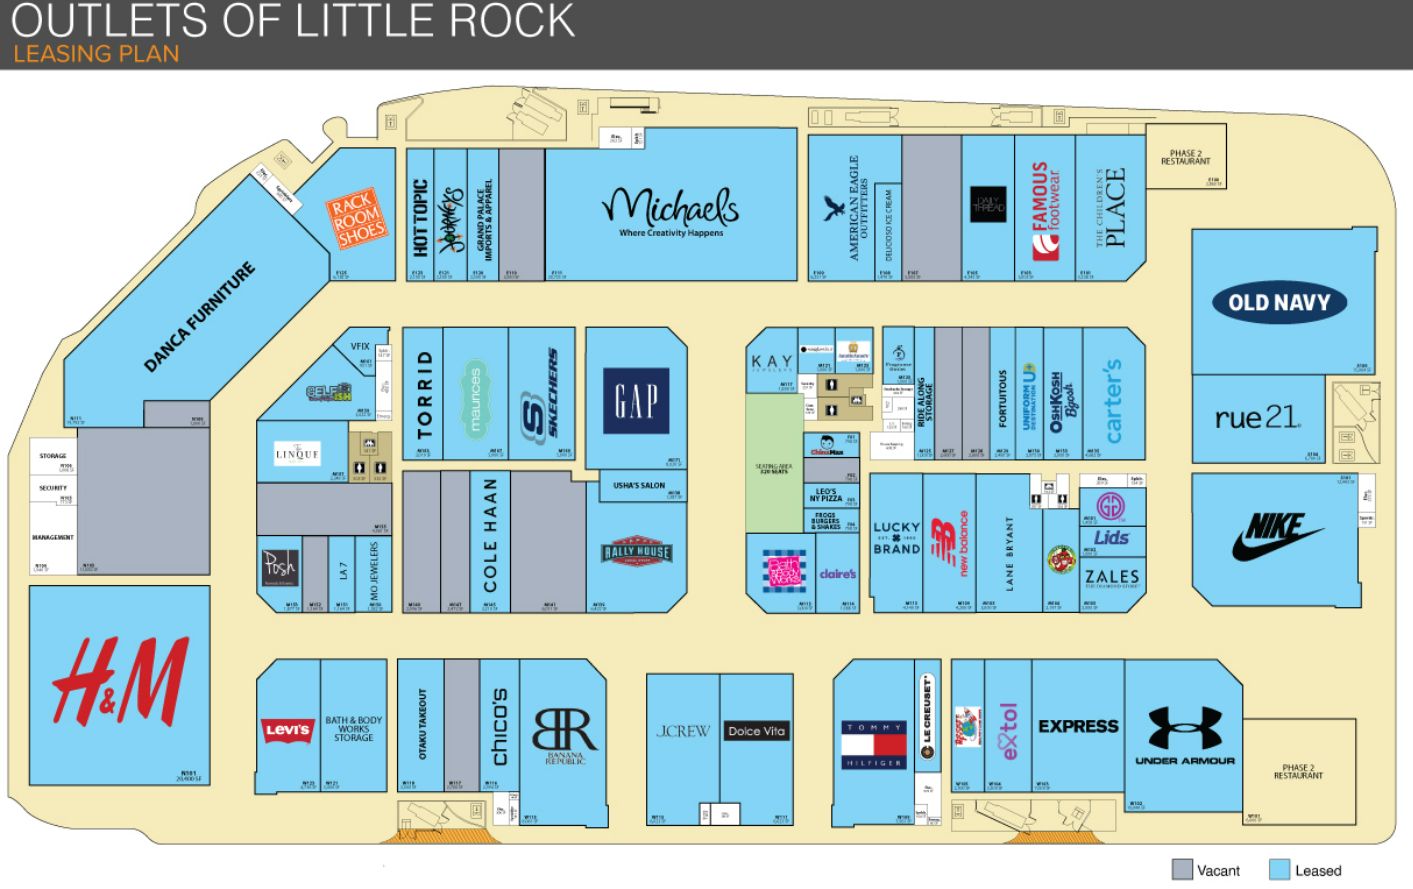 Outlets of little rock directory